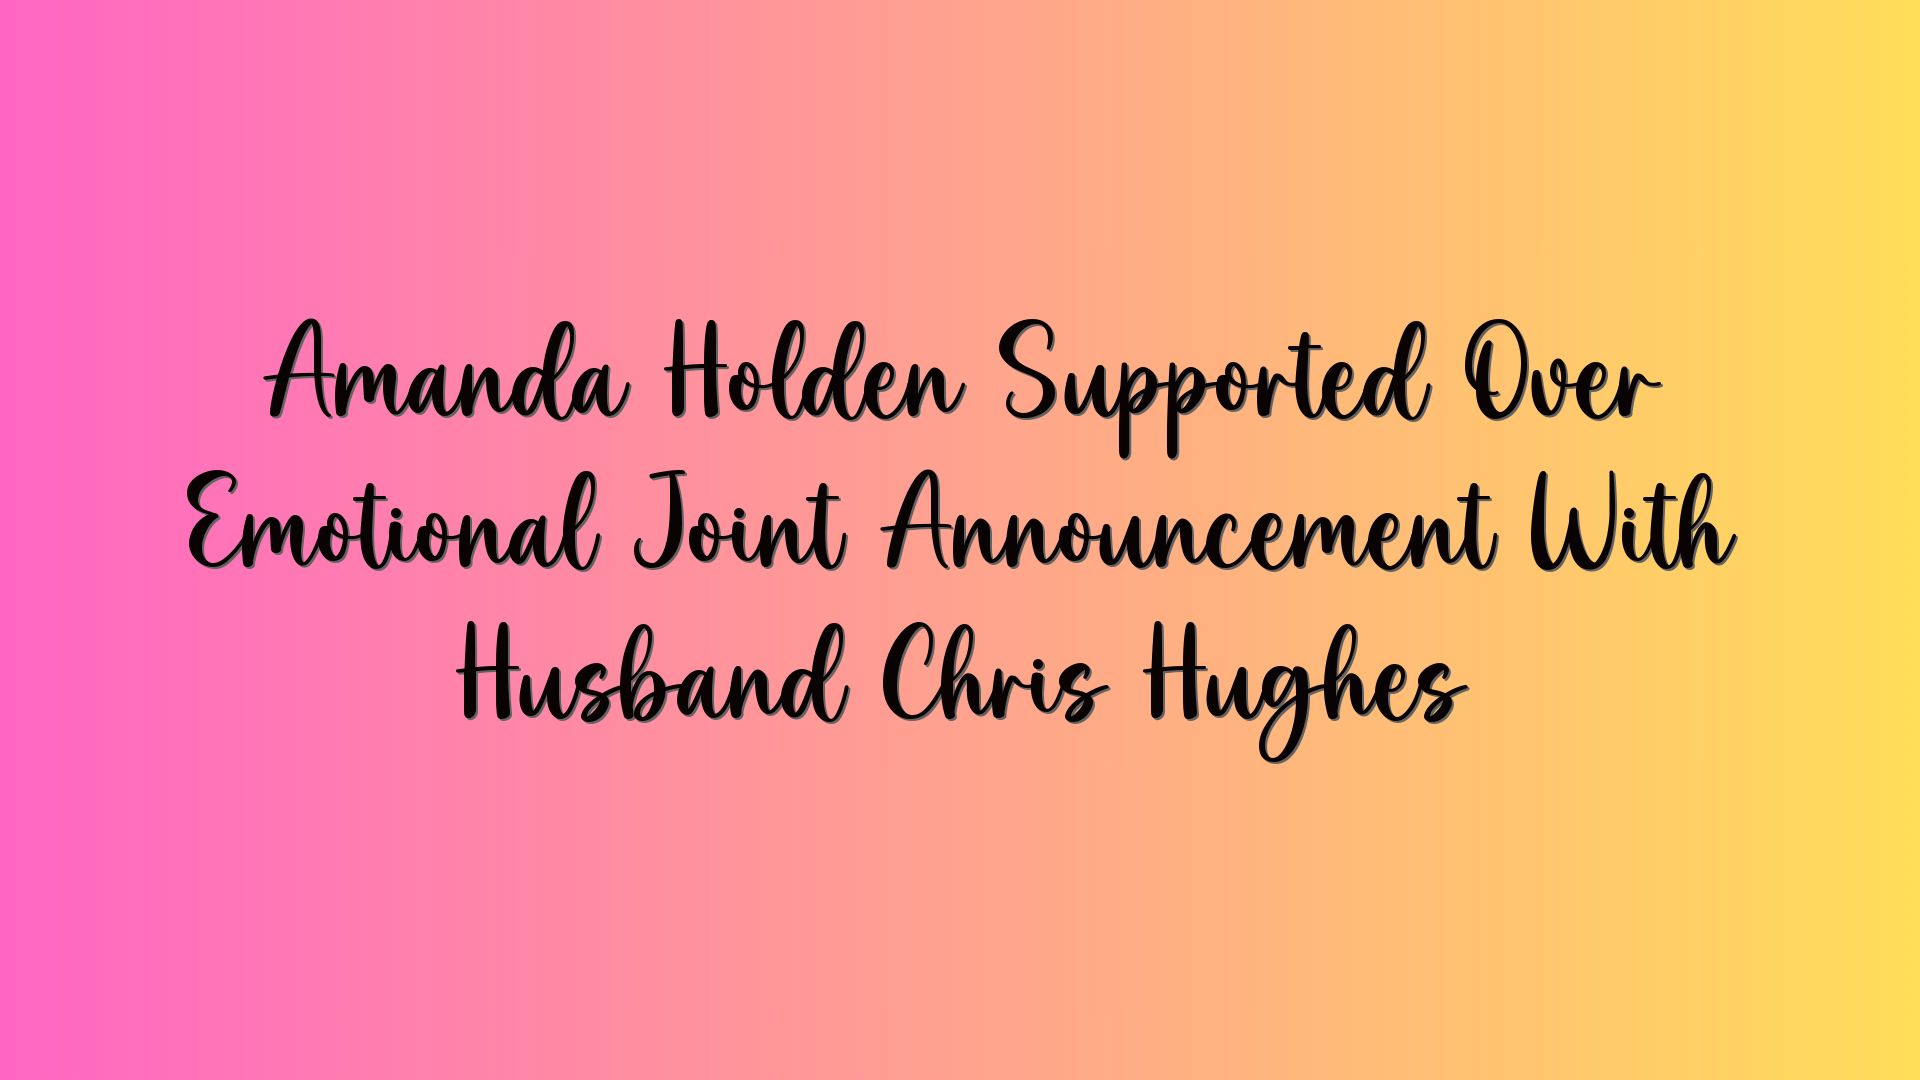 Amanda Holden Supported Over Emotional Joint Announcement With Husband Chris Hughes